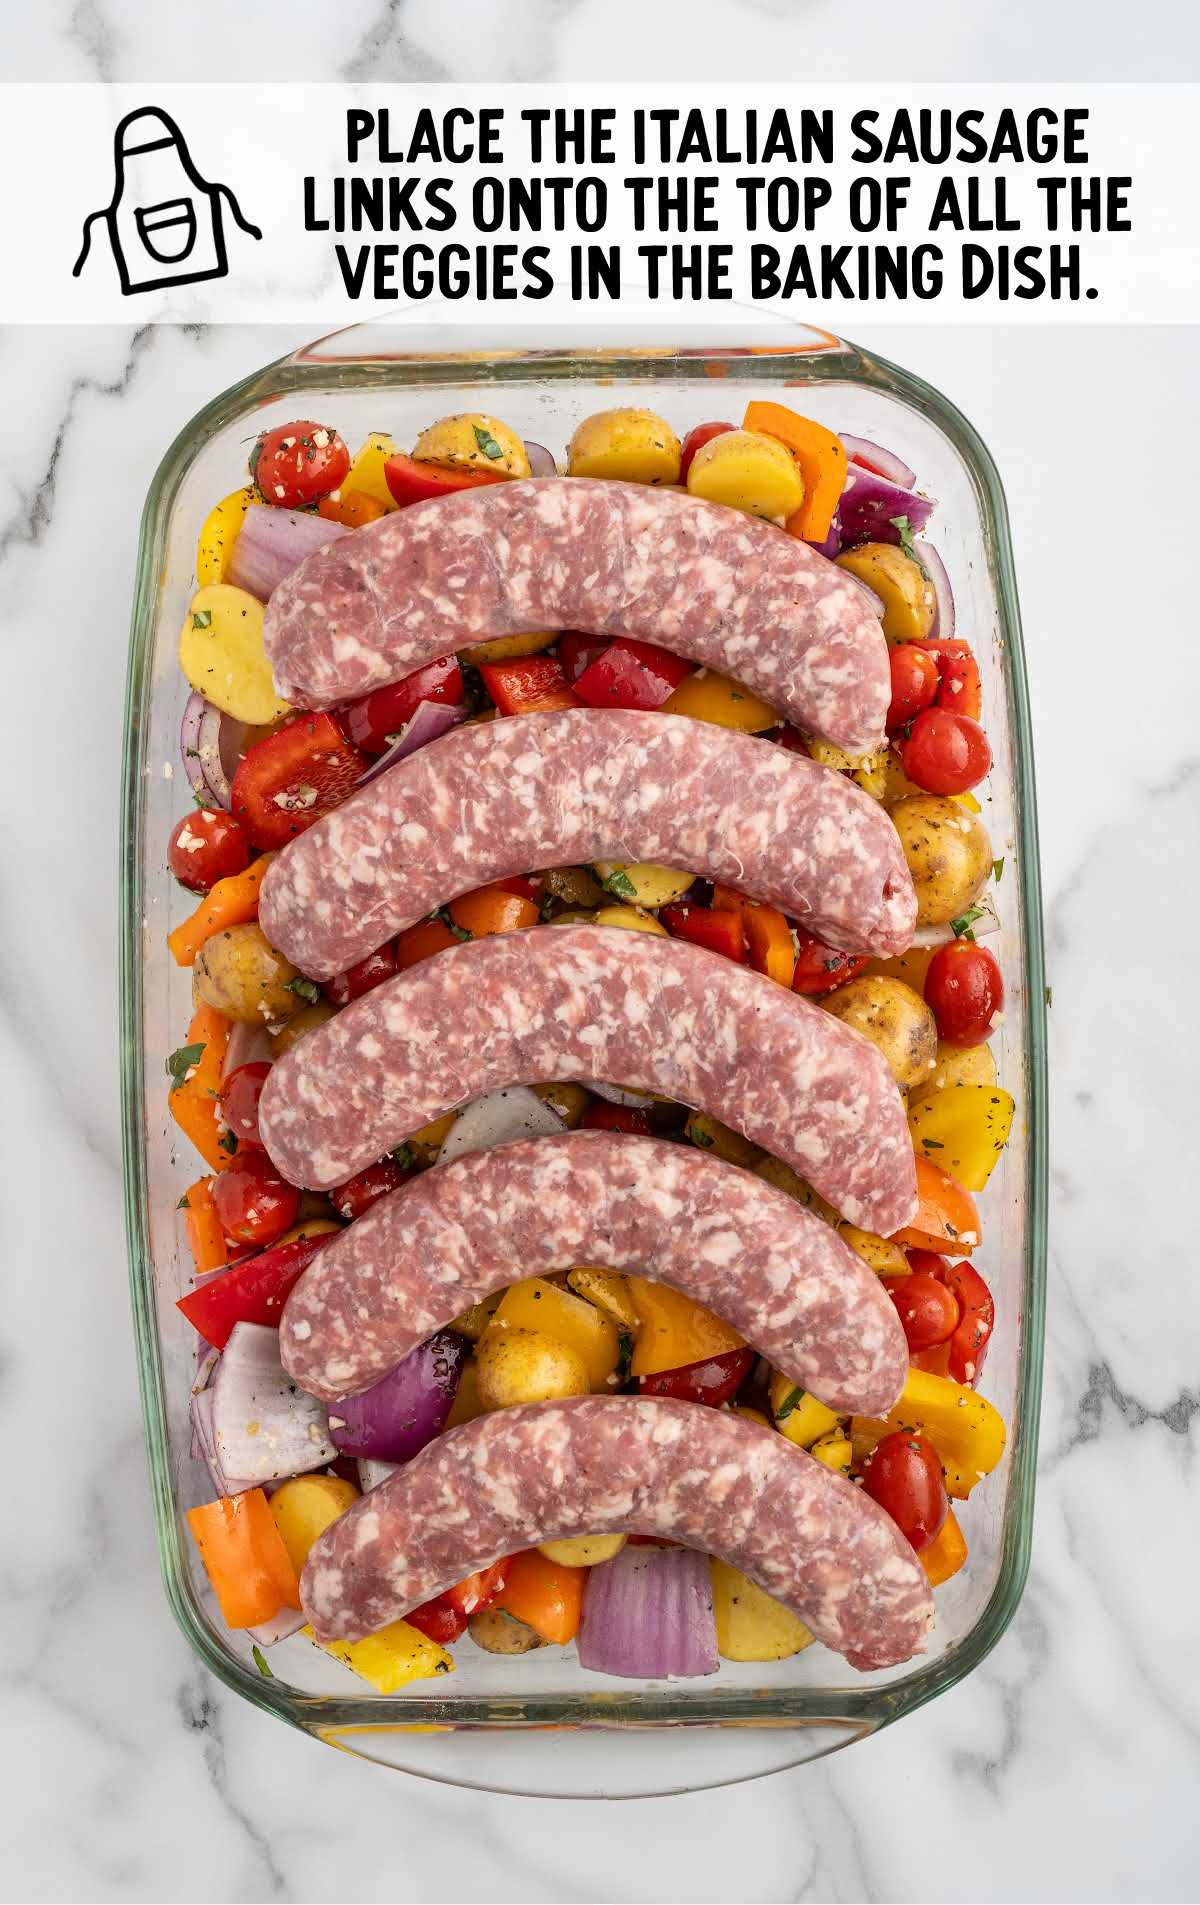 mild Italian sausage links placed on top of the vegetables in the baking dish